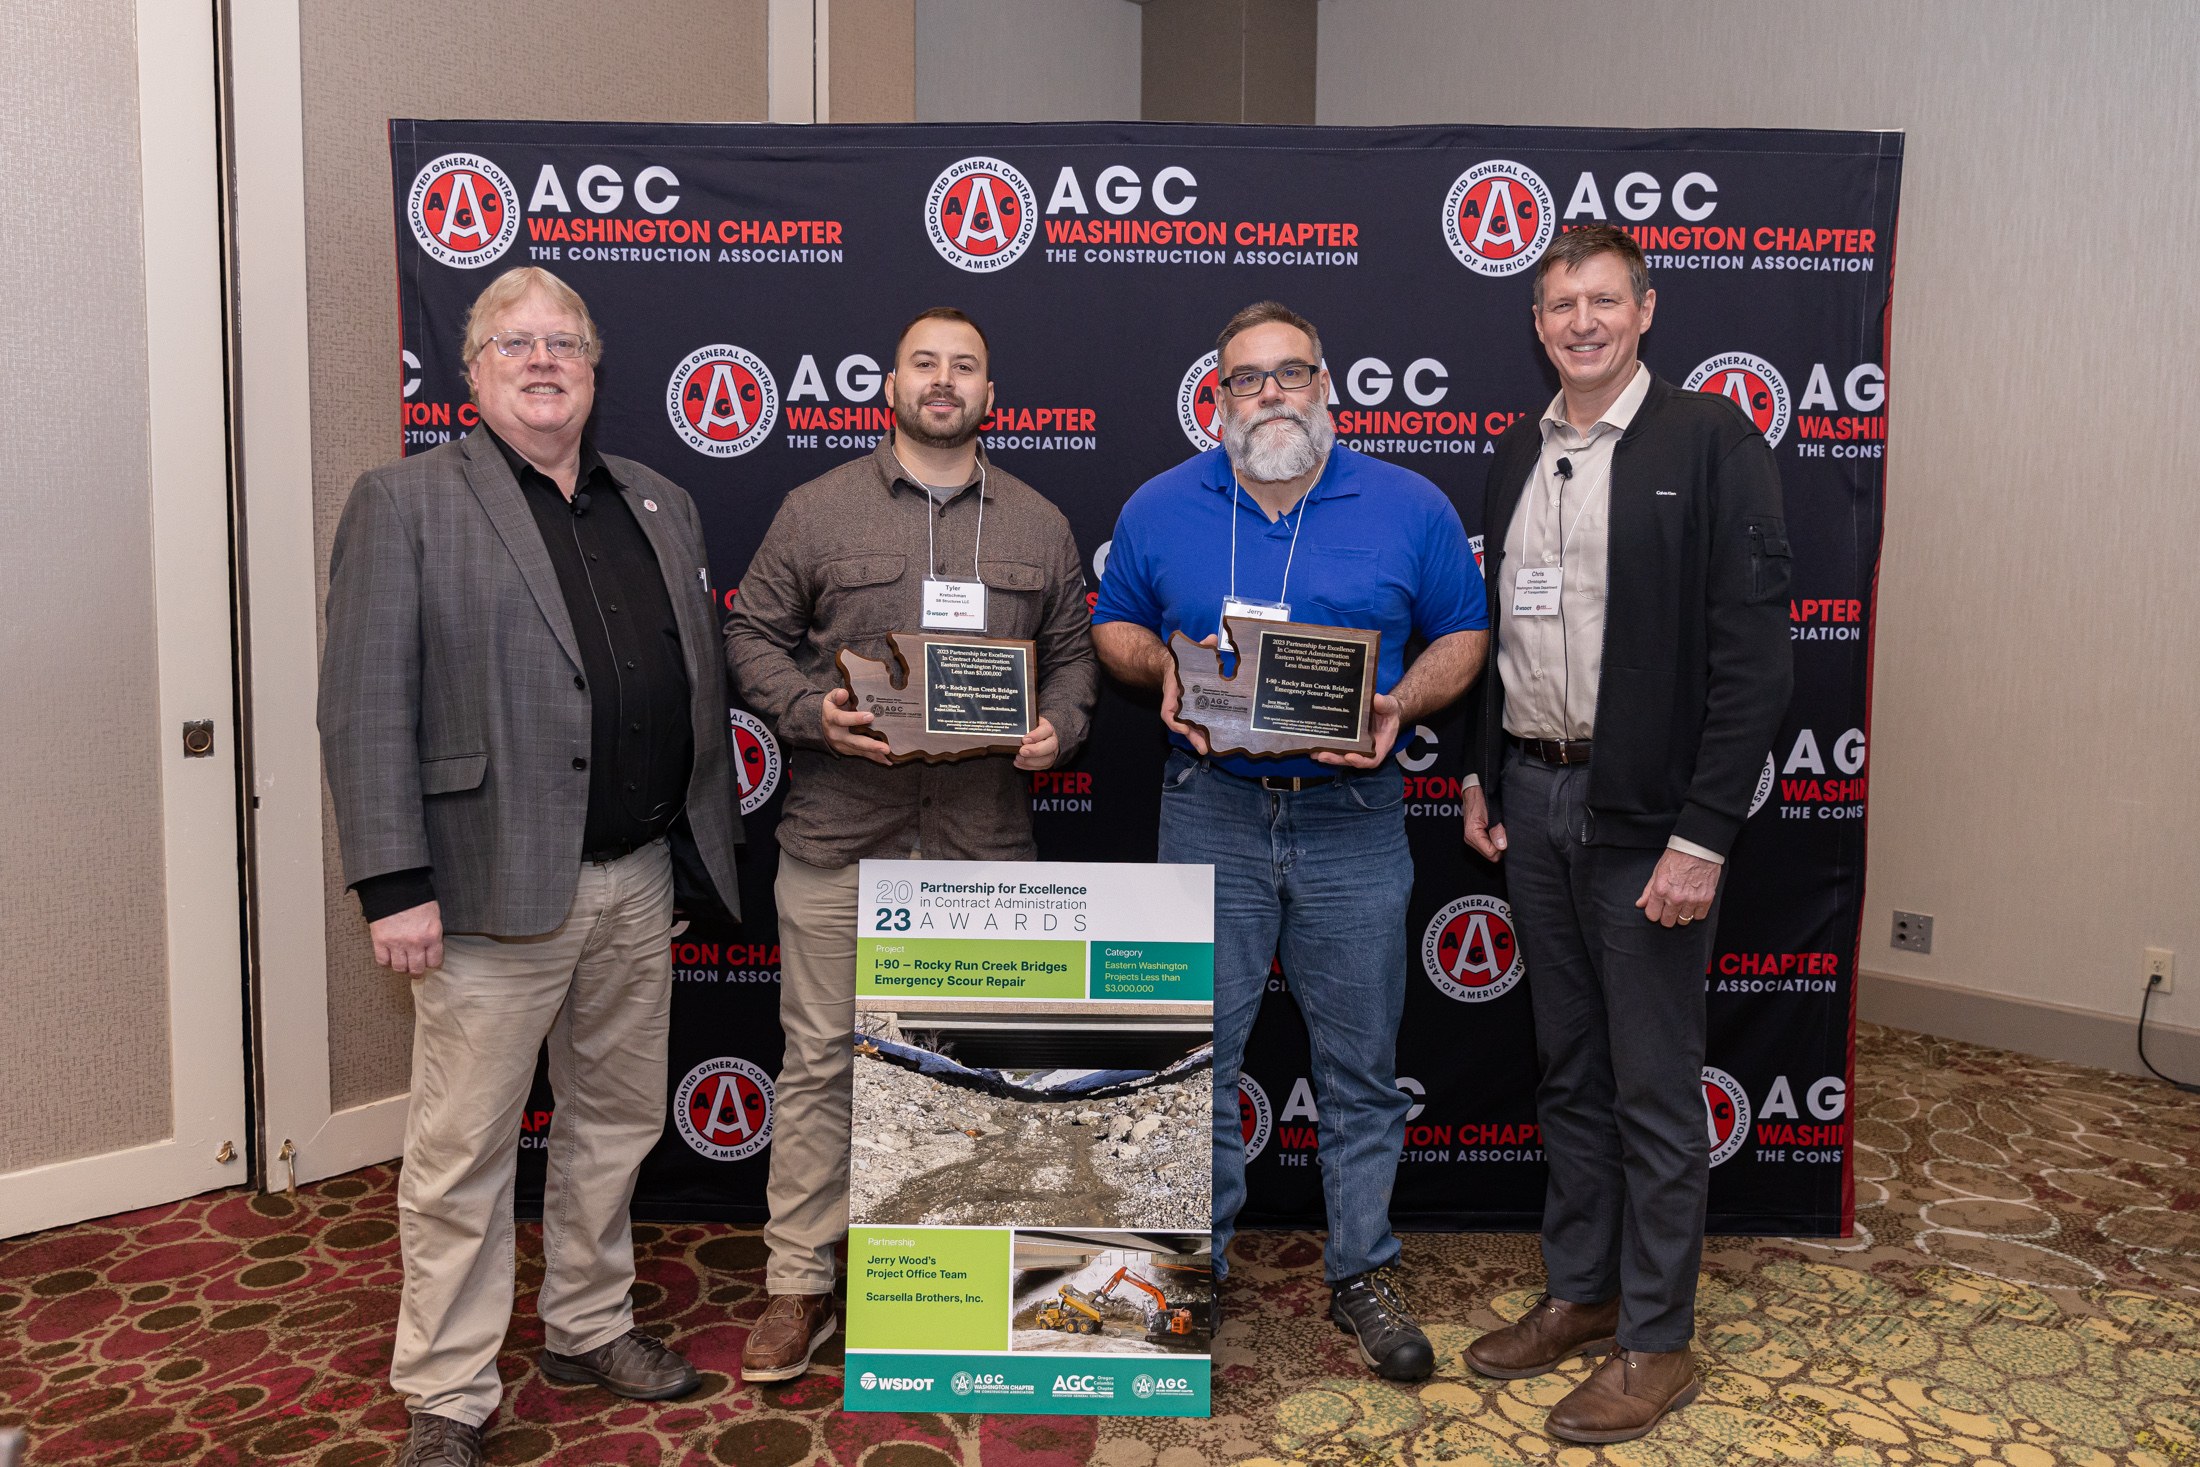 Four people, two of whom are holding award plaques, standing in front of an AGC Washington Chapter backdrop.